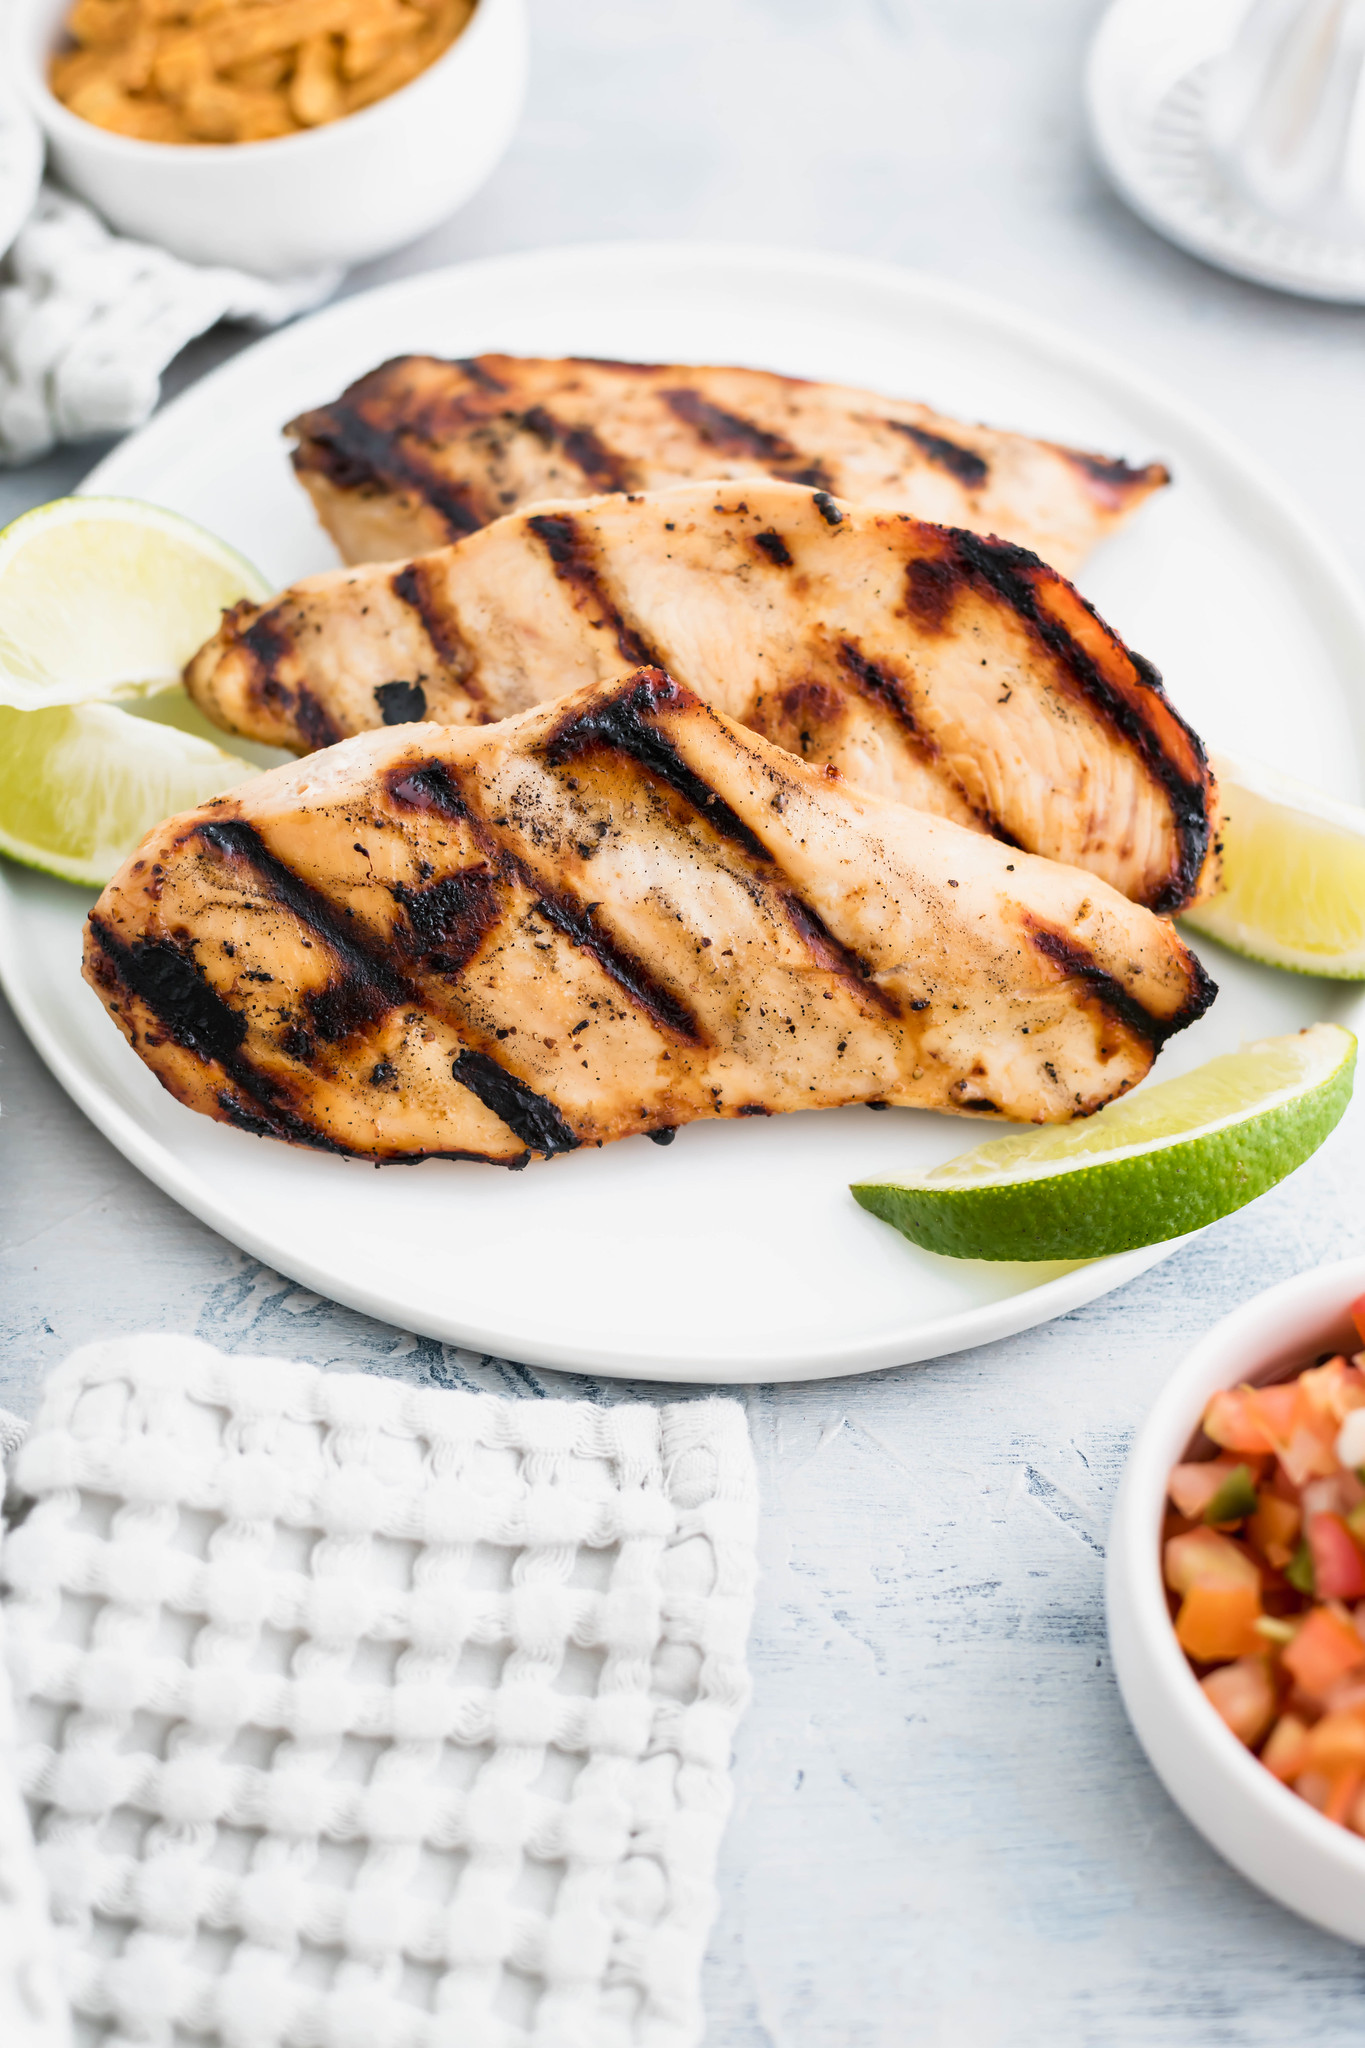 Skip eating out and make this copycat Chili's Margarita Grilled Chicken. It's a restaurant favorite that tastes just as delicious at home.